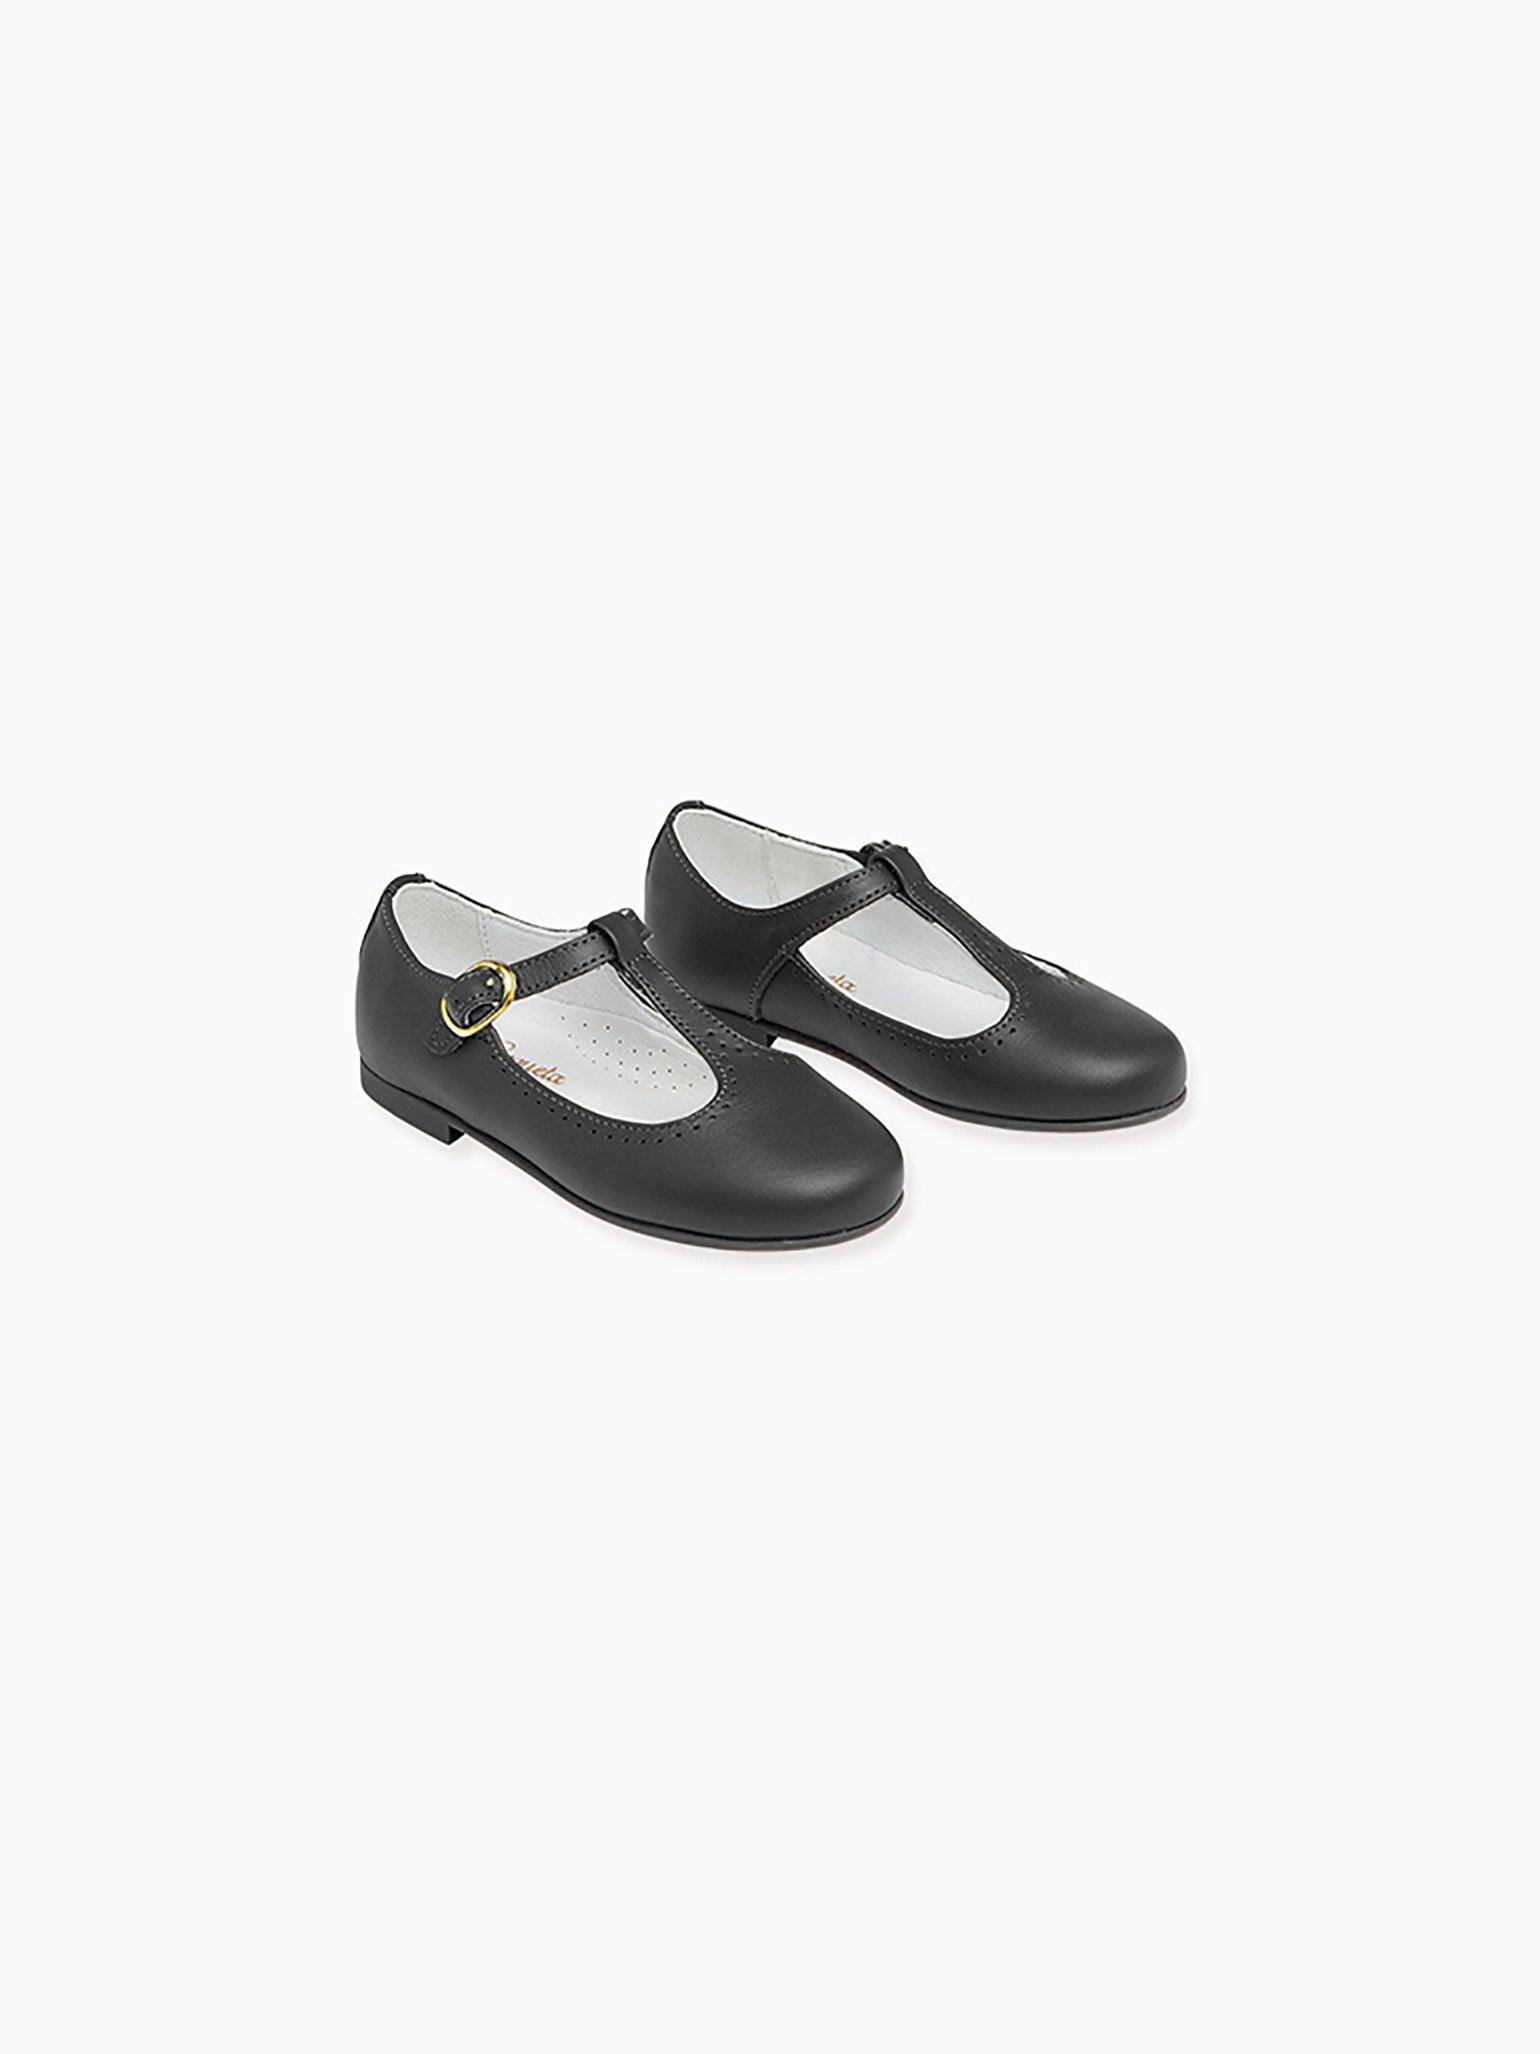 Black Leather Girl T-Bar Shoes